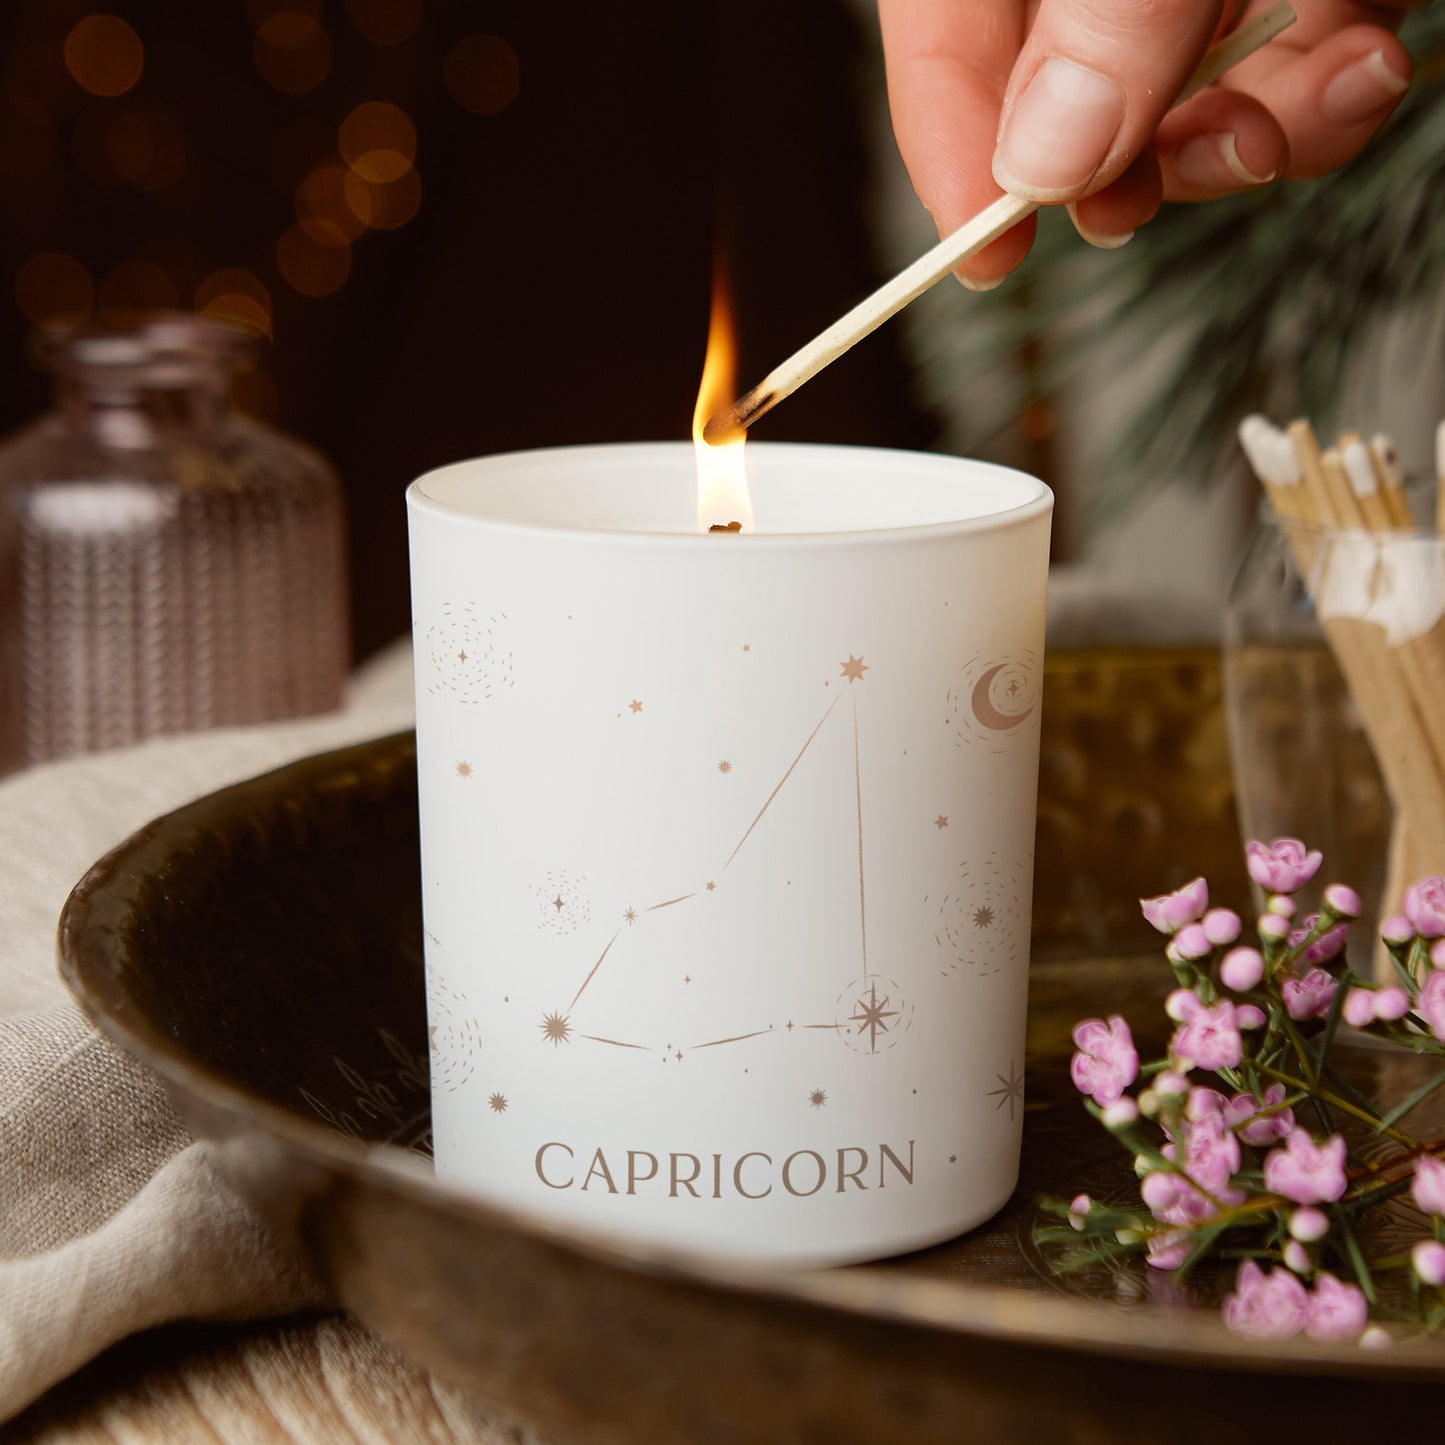 Capricorn Star Sign Candle Gift Zodiac Constellation Glow Through Candle